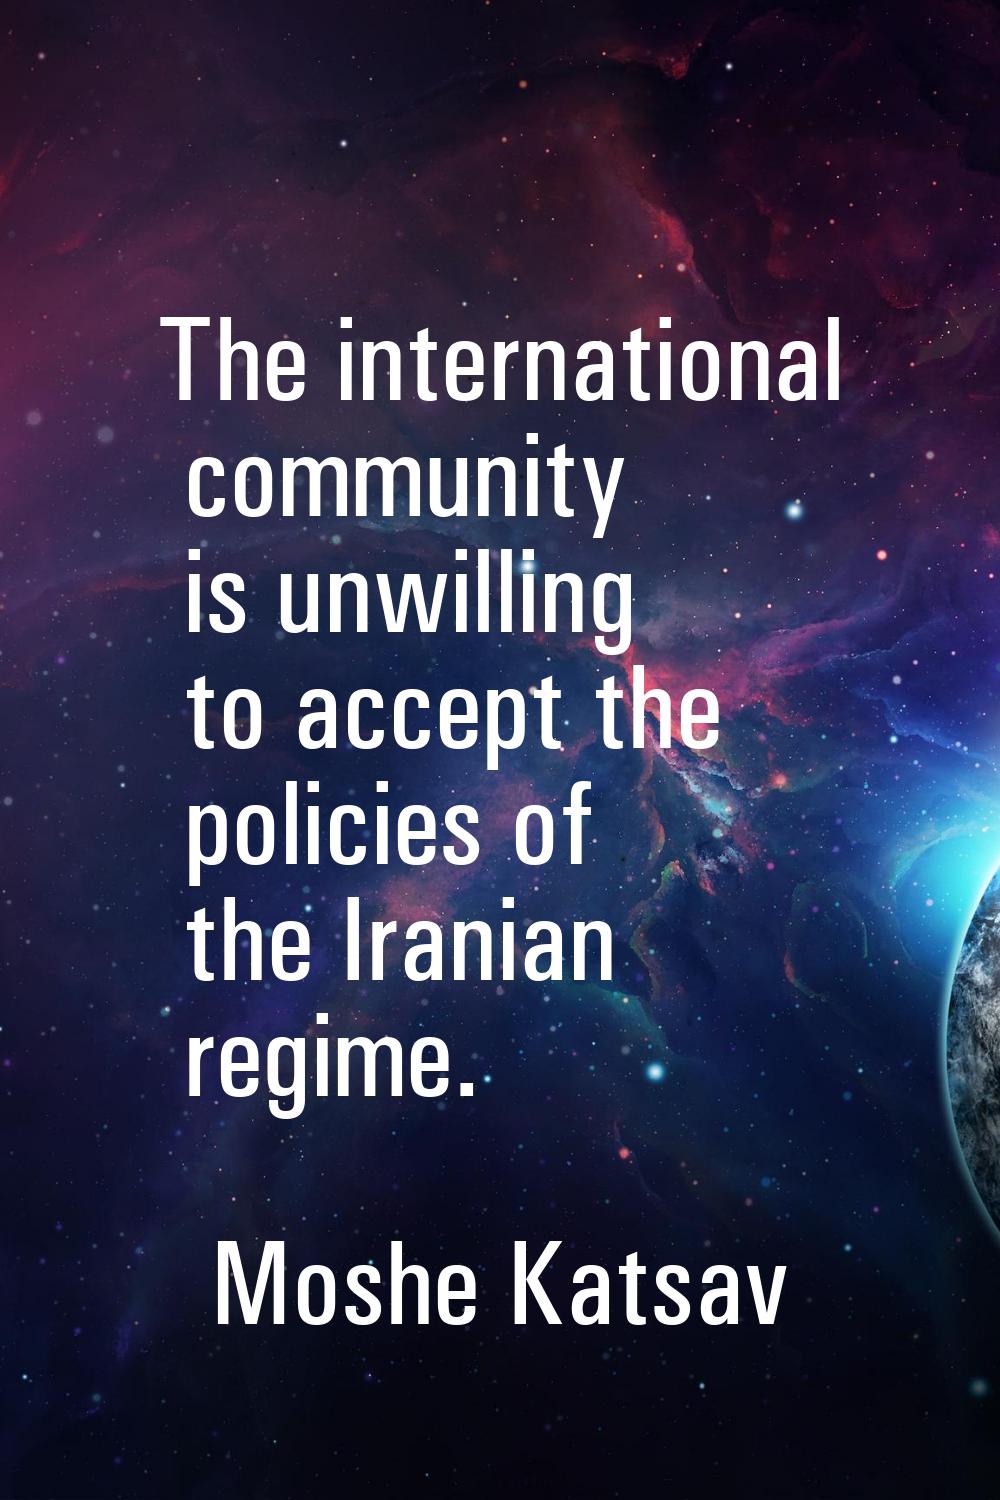 The international community is unwilling to accept the policies of the Iranian regime.